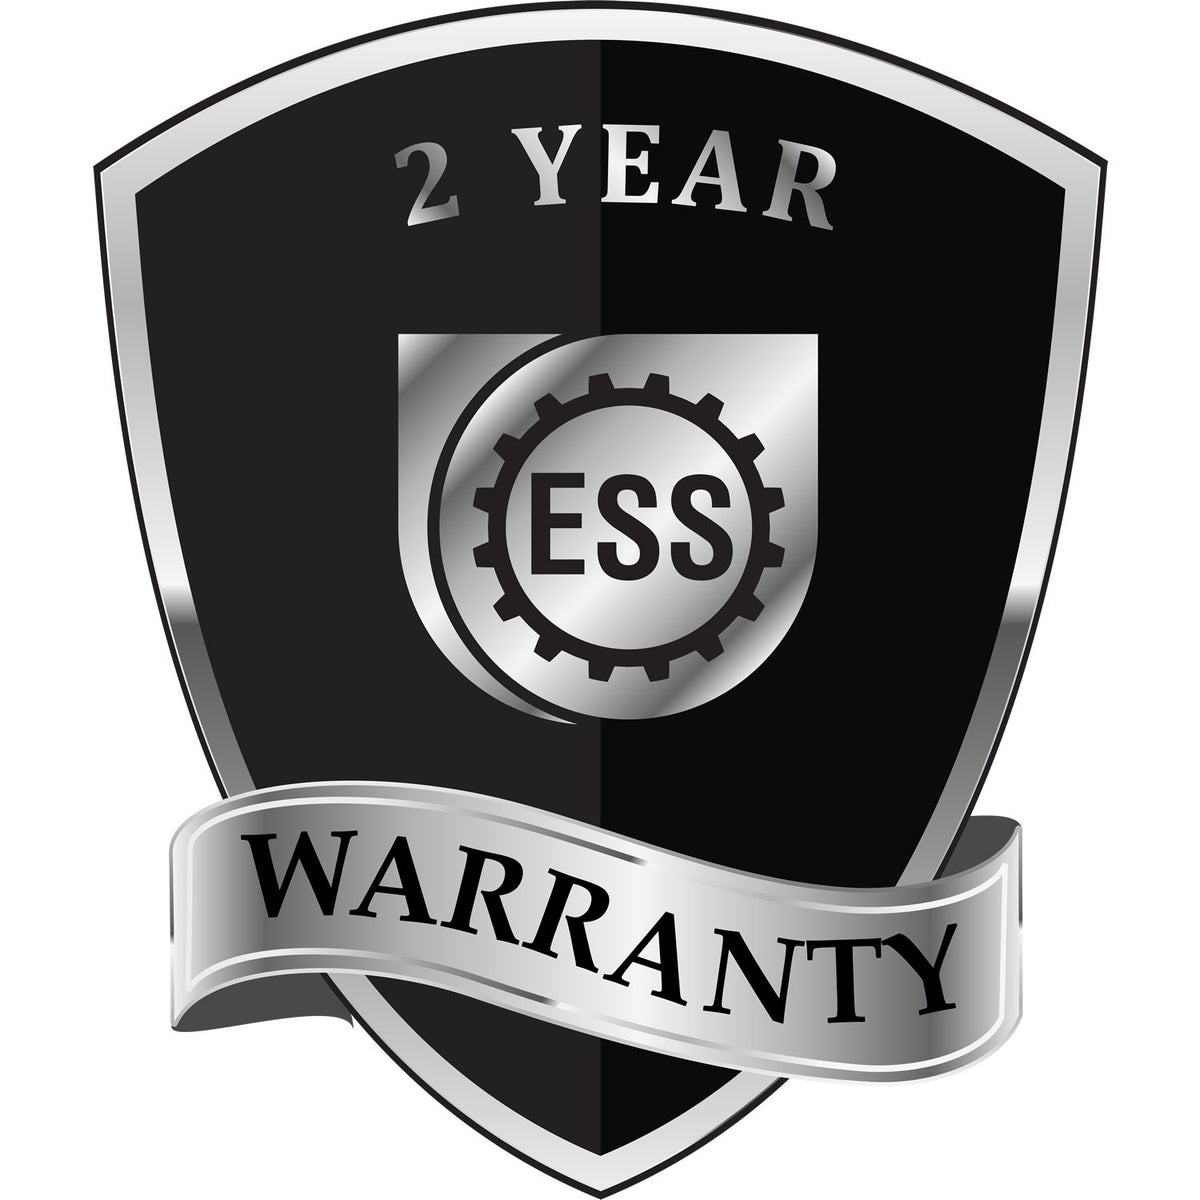 A black and silver badge or emblem showing warranty information for the Gift Michigan Architect Seal